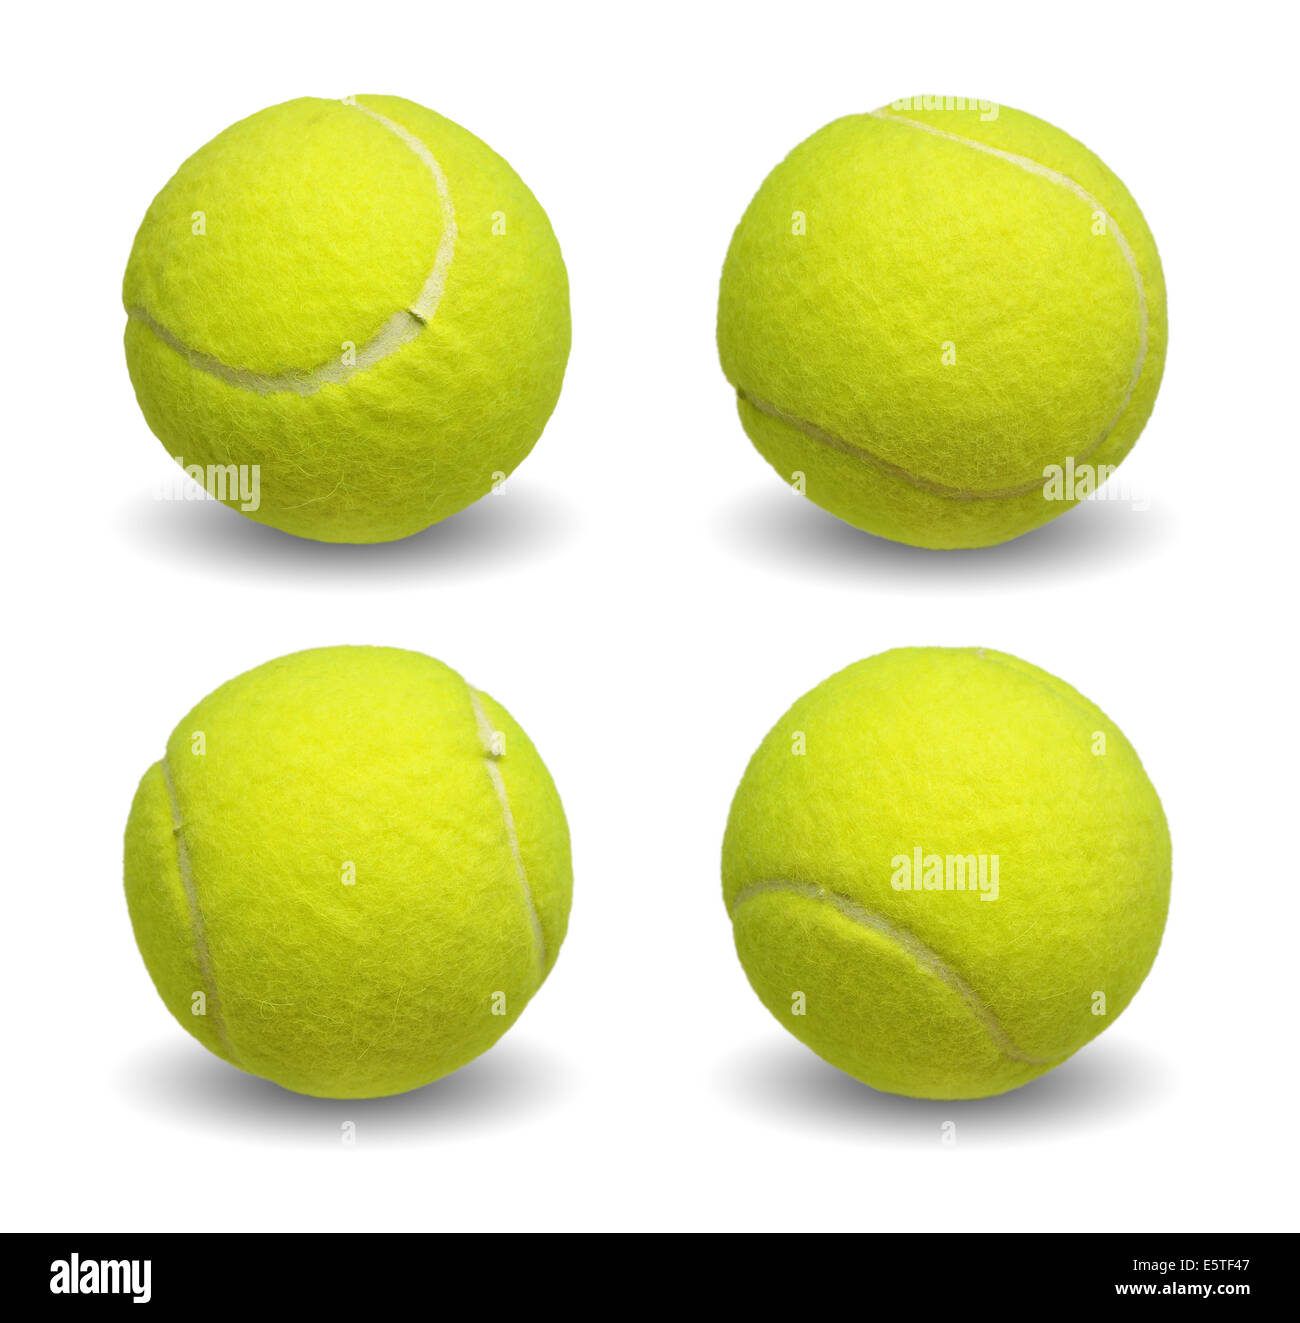 Tennis ball collection isolated on white background Stock Photo